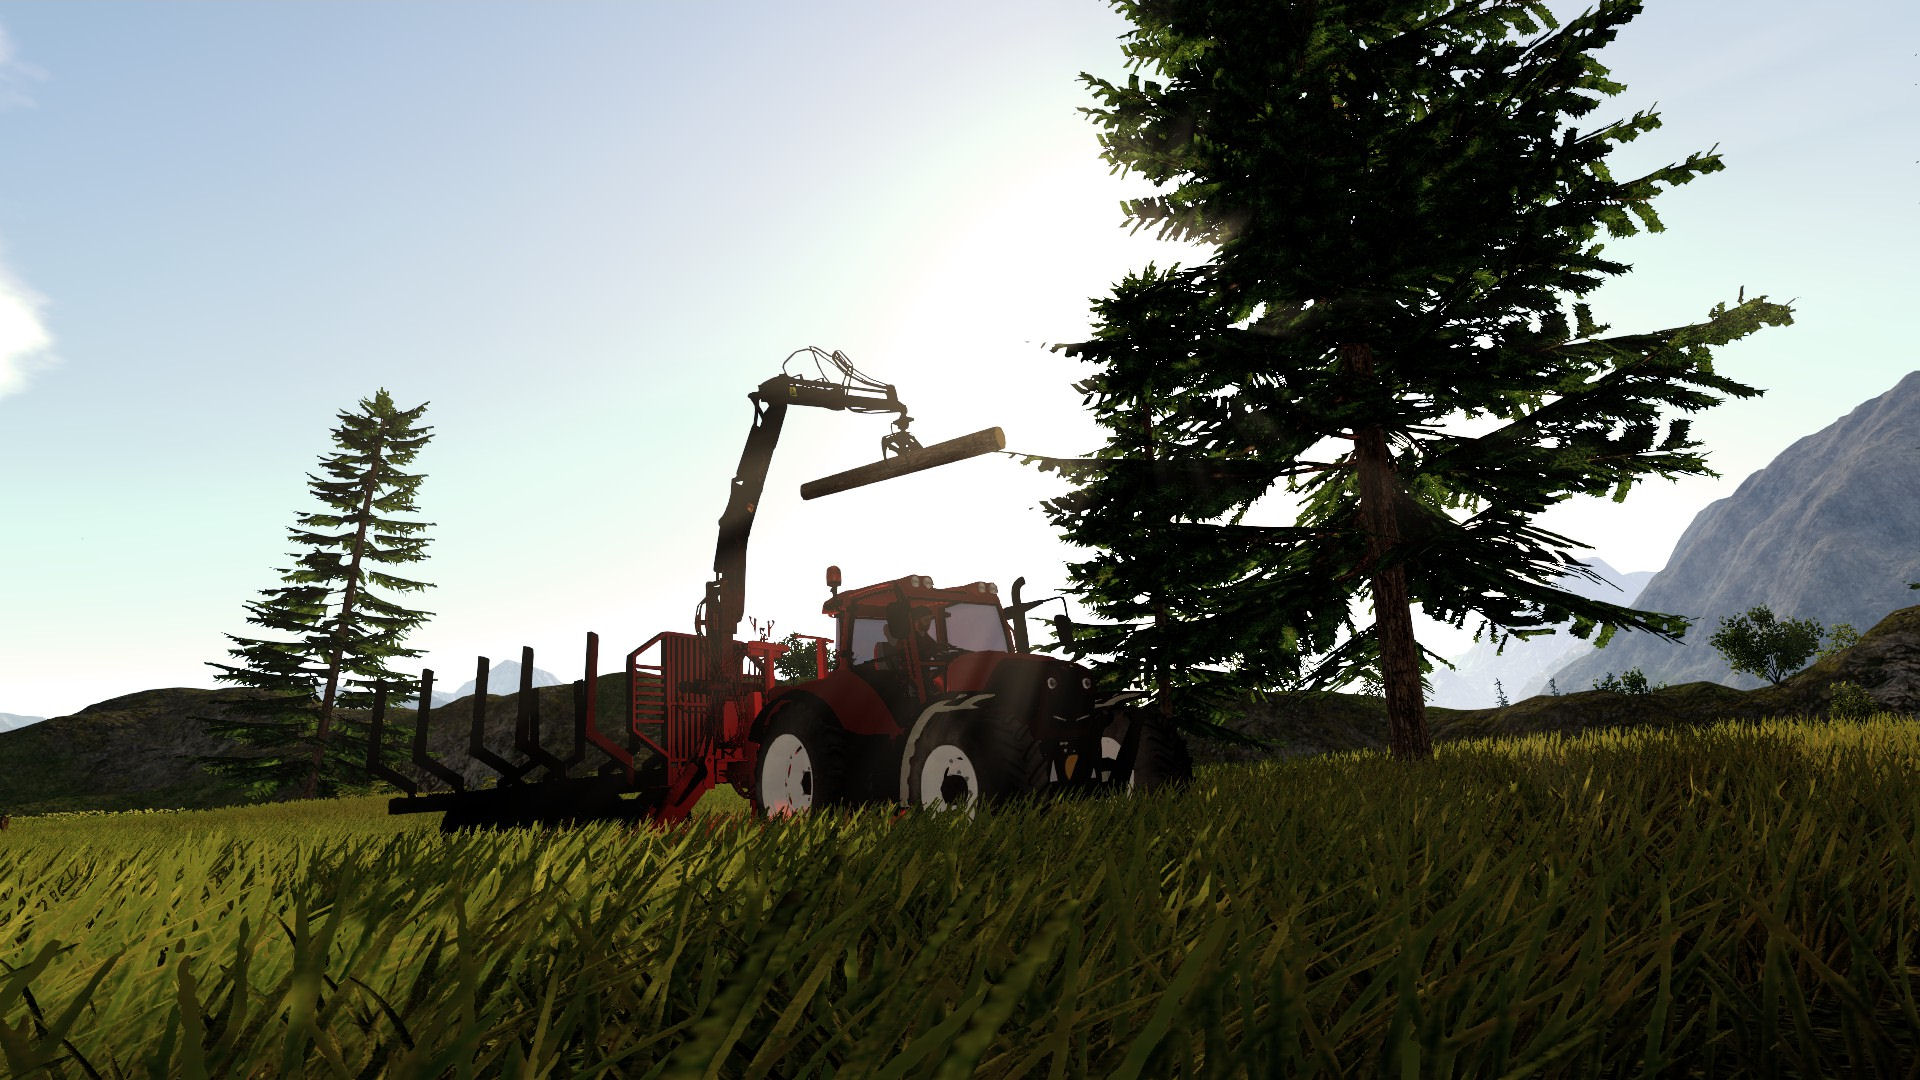 Forestry 2017: The Simulation - screenshot 19